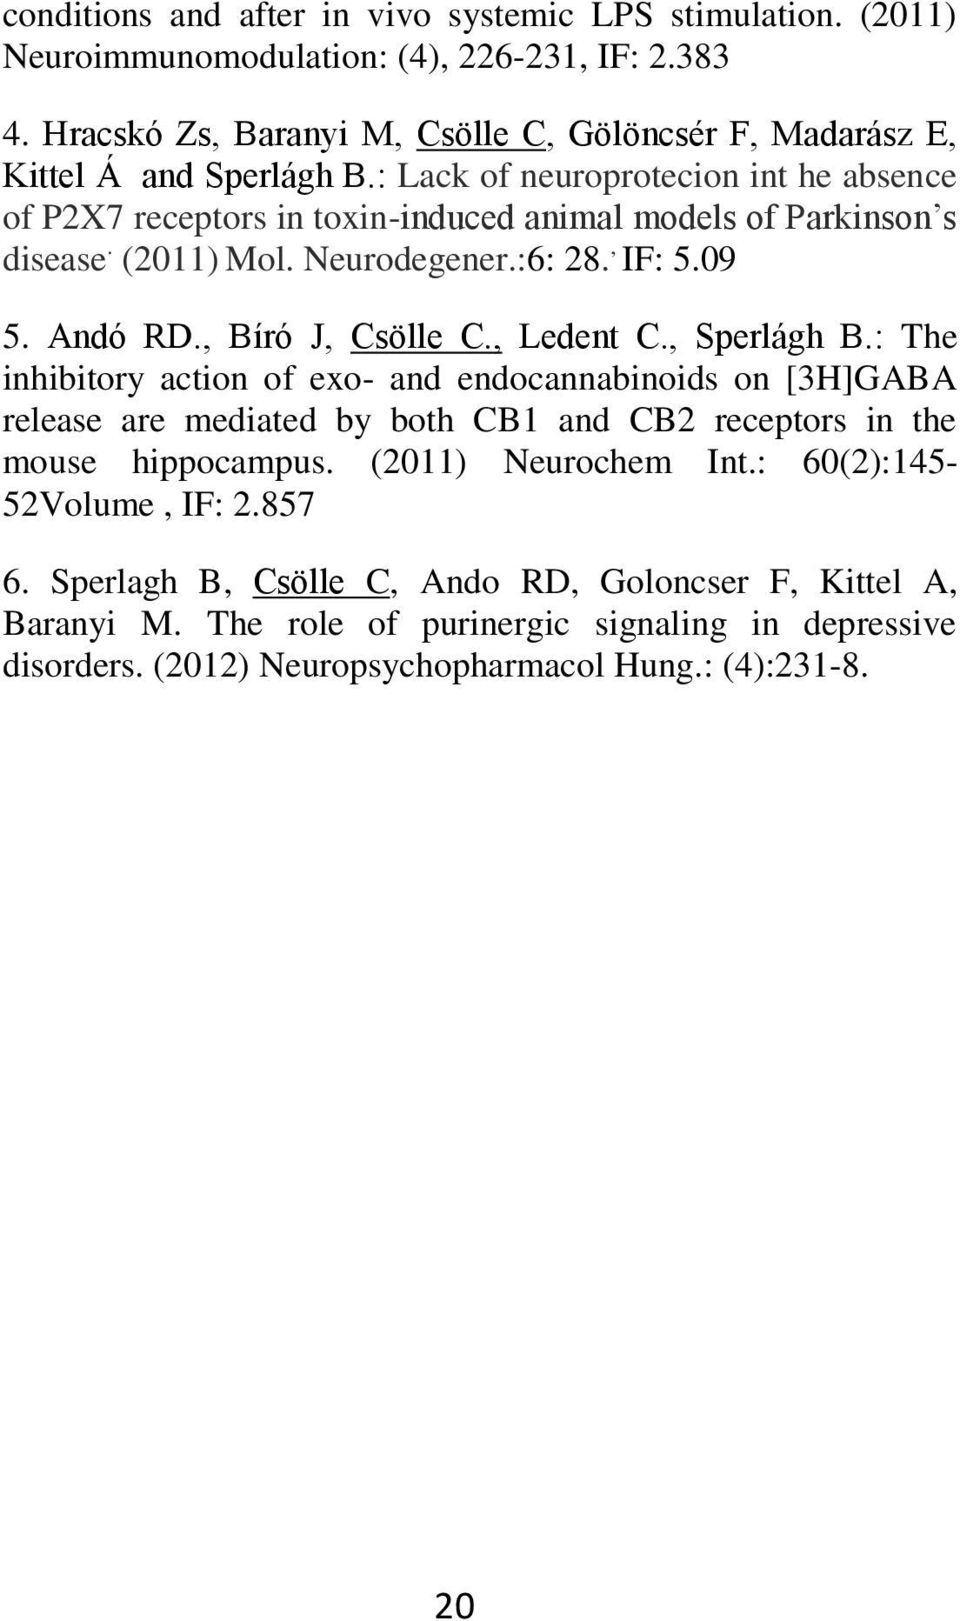 , Ledent C., Sperlágh B.: The inhibitory action of exo- and endocannabinoids on [3H]GABA release are mediated by both CB1 and CB2 receptors in the mouse hippocampus. (2011) Neurochem Int.